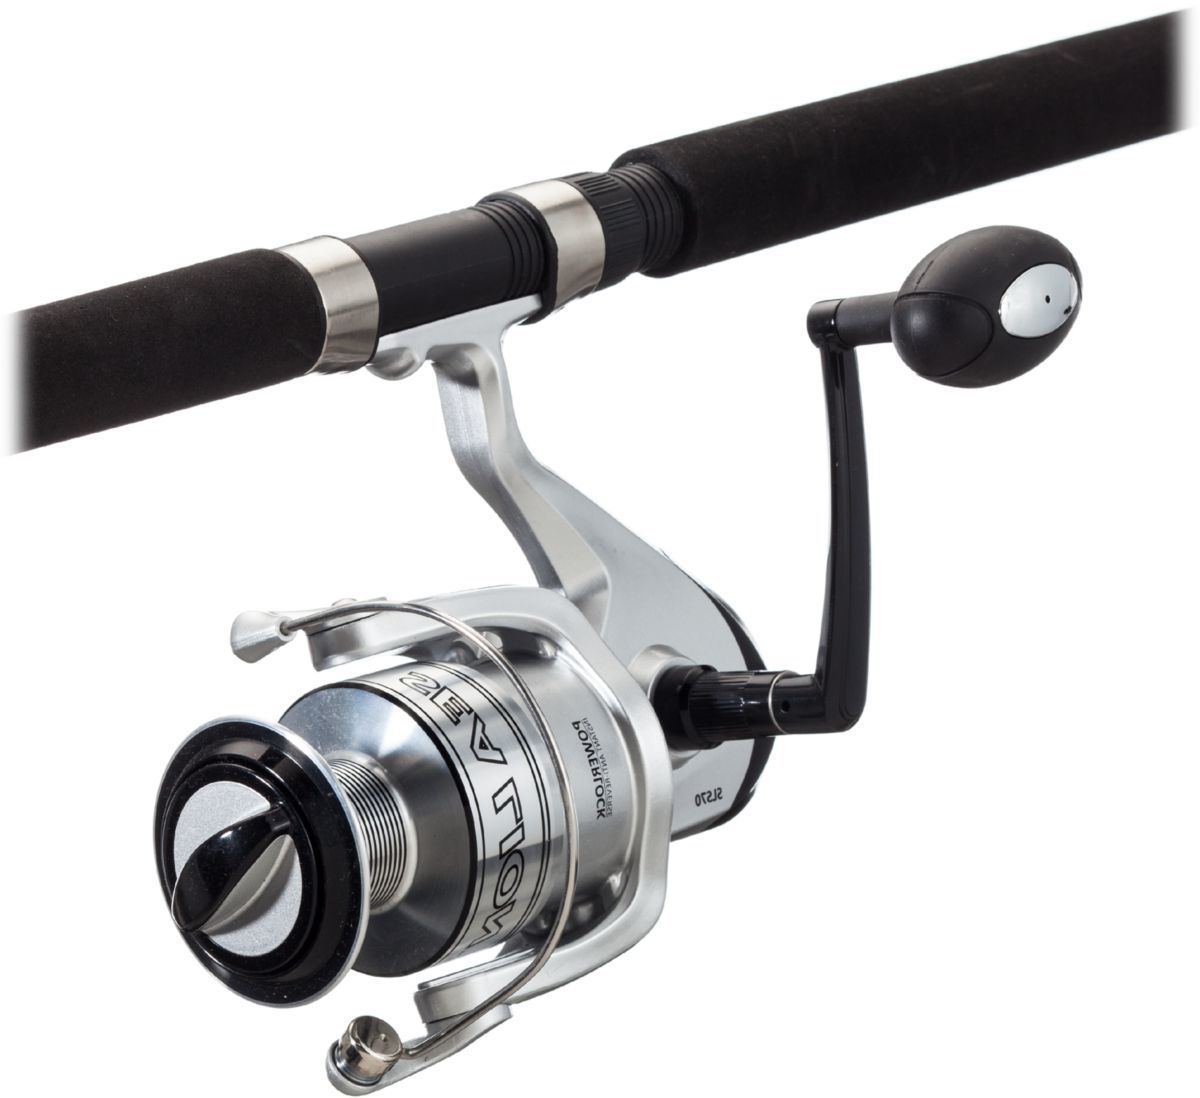 Offshore Angler™ Sea Lion™ Rod and Reel Spinning Combo